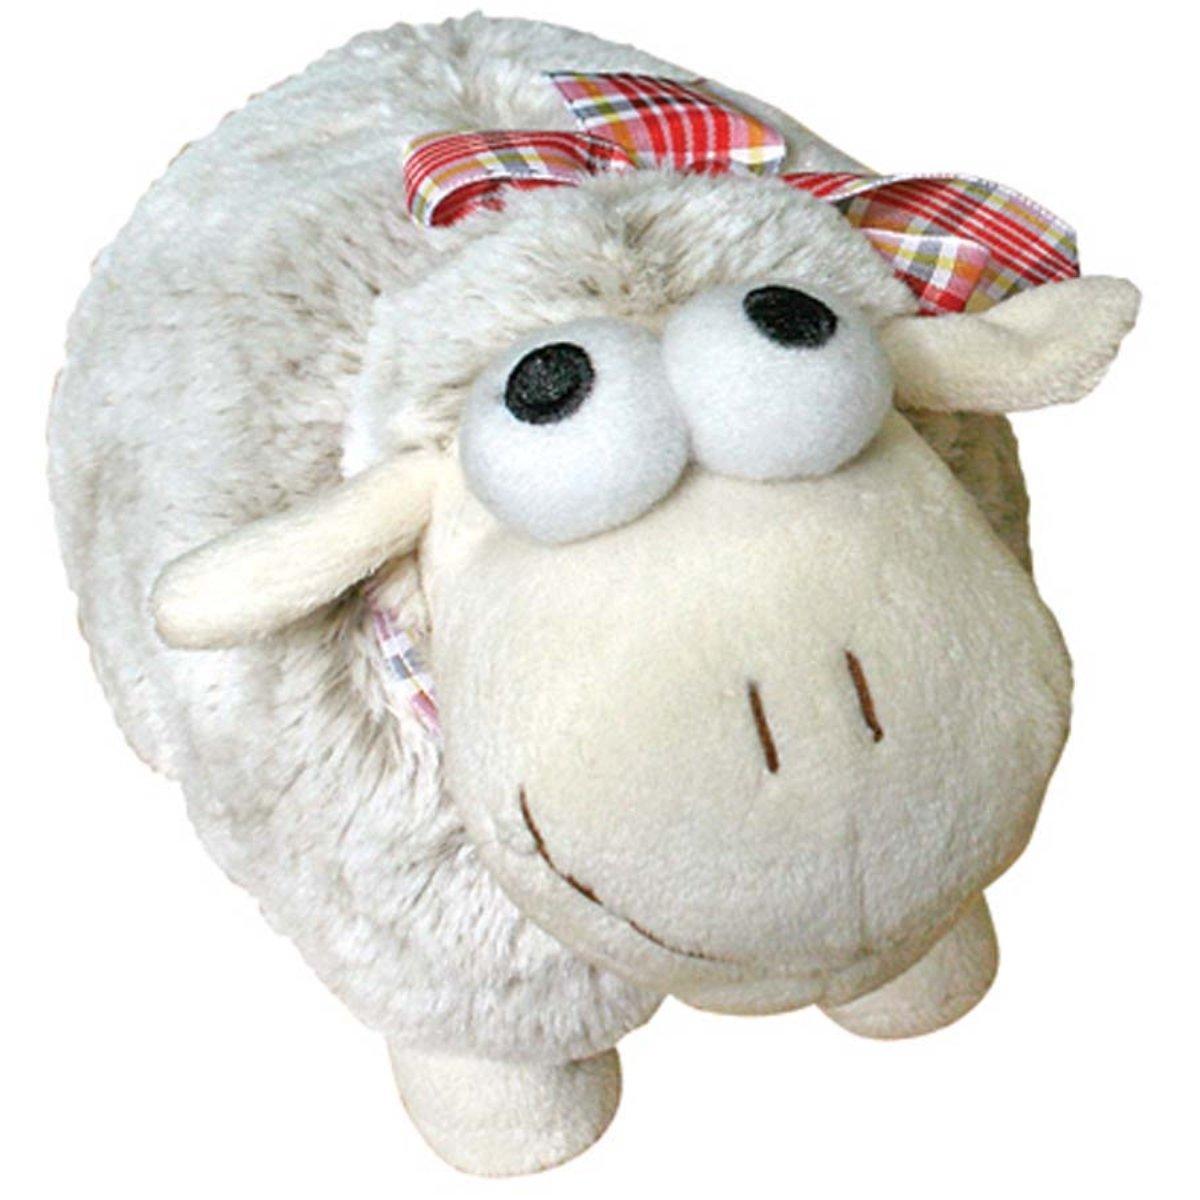 Sheep Soft Toy-Tartan-Cream (Small) Gifts - Soft Toy